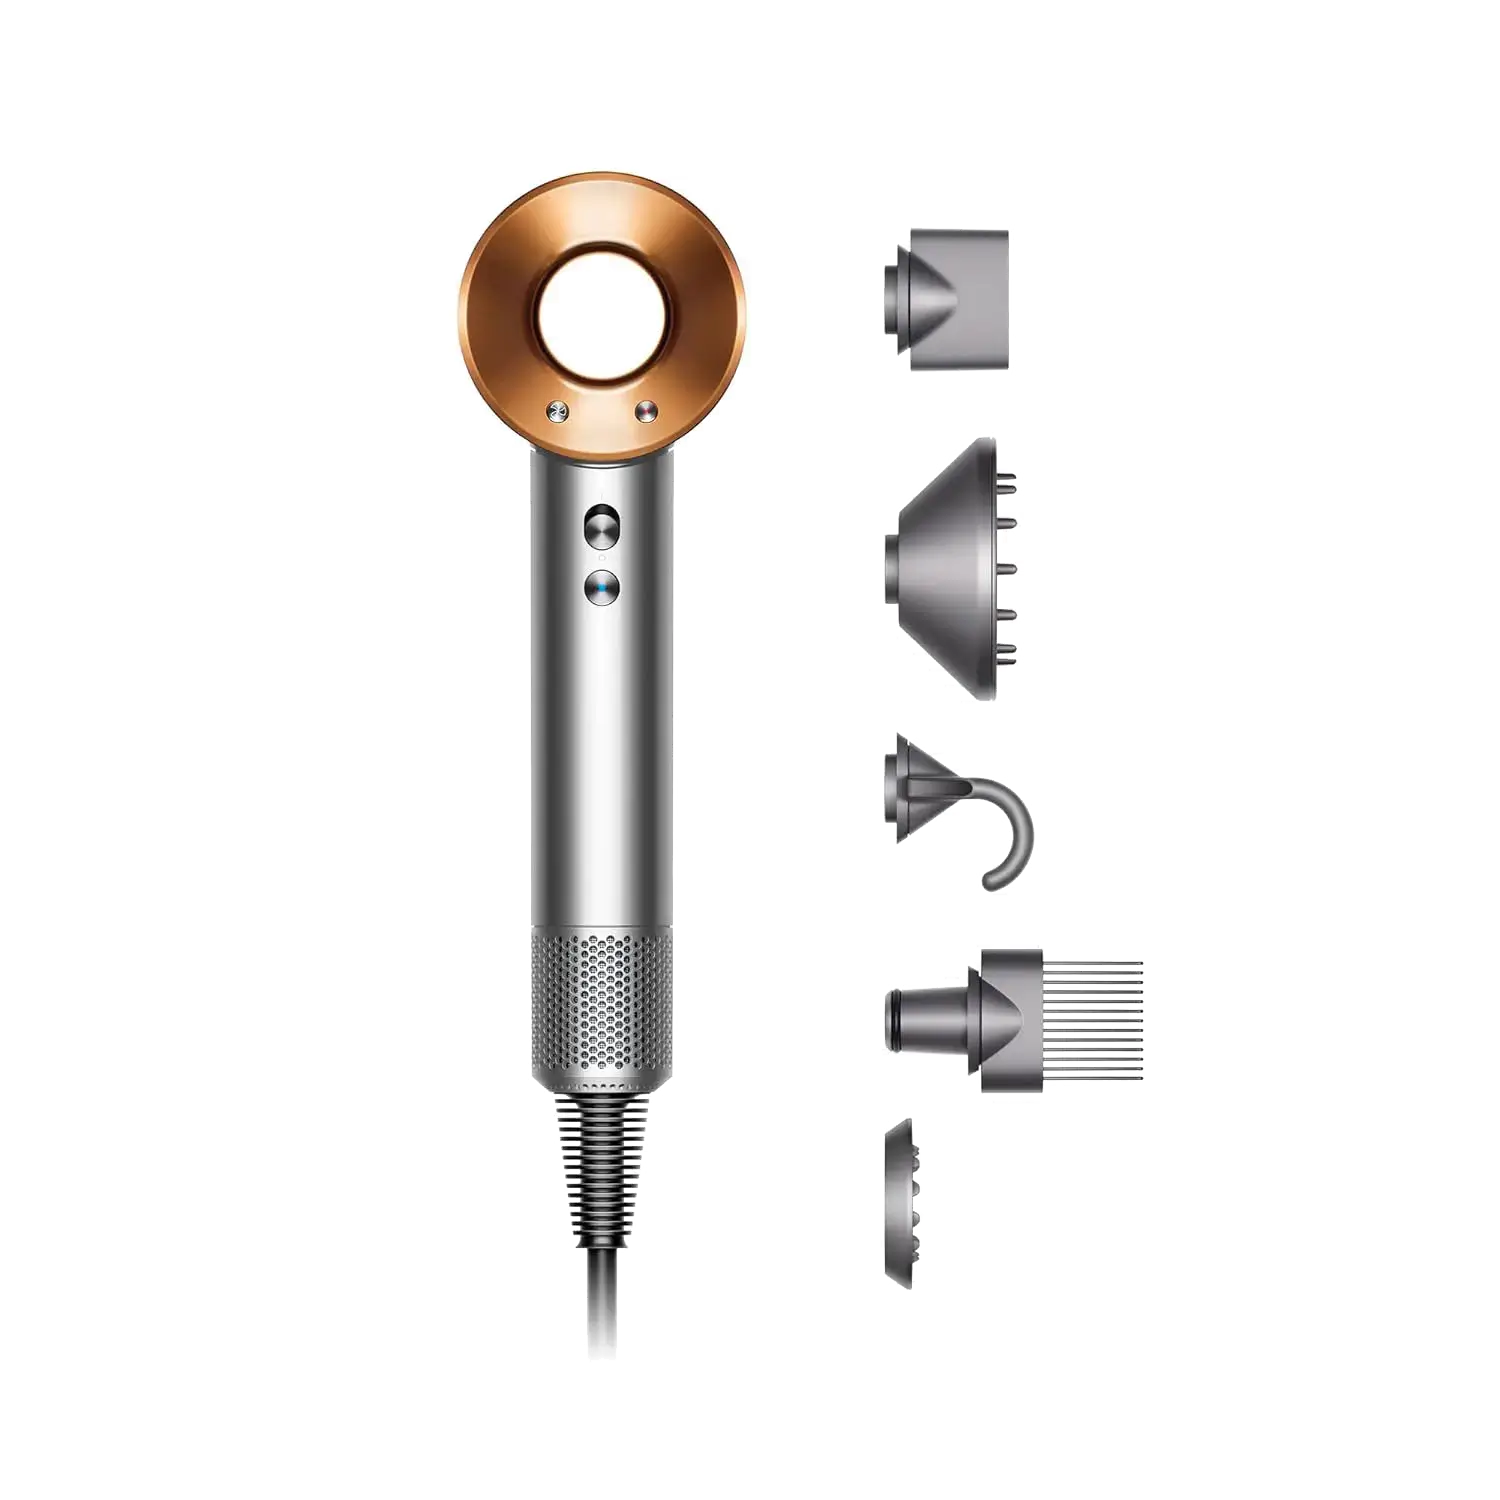 Two sleek, modern hair dryers with unique circular design.